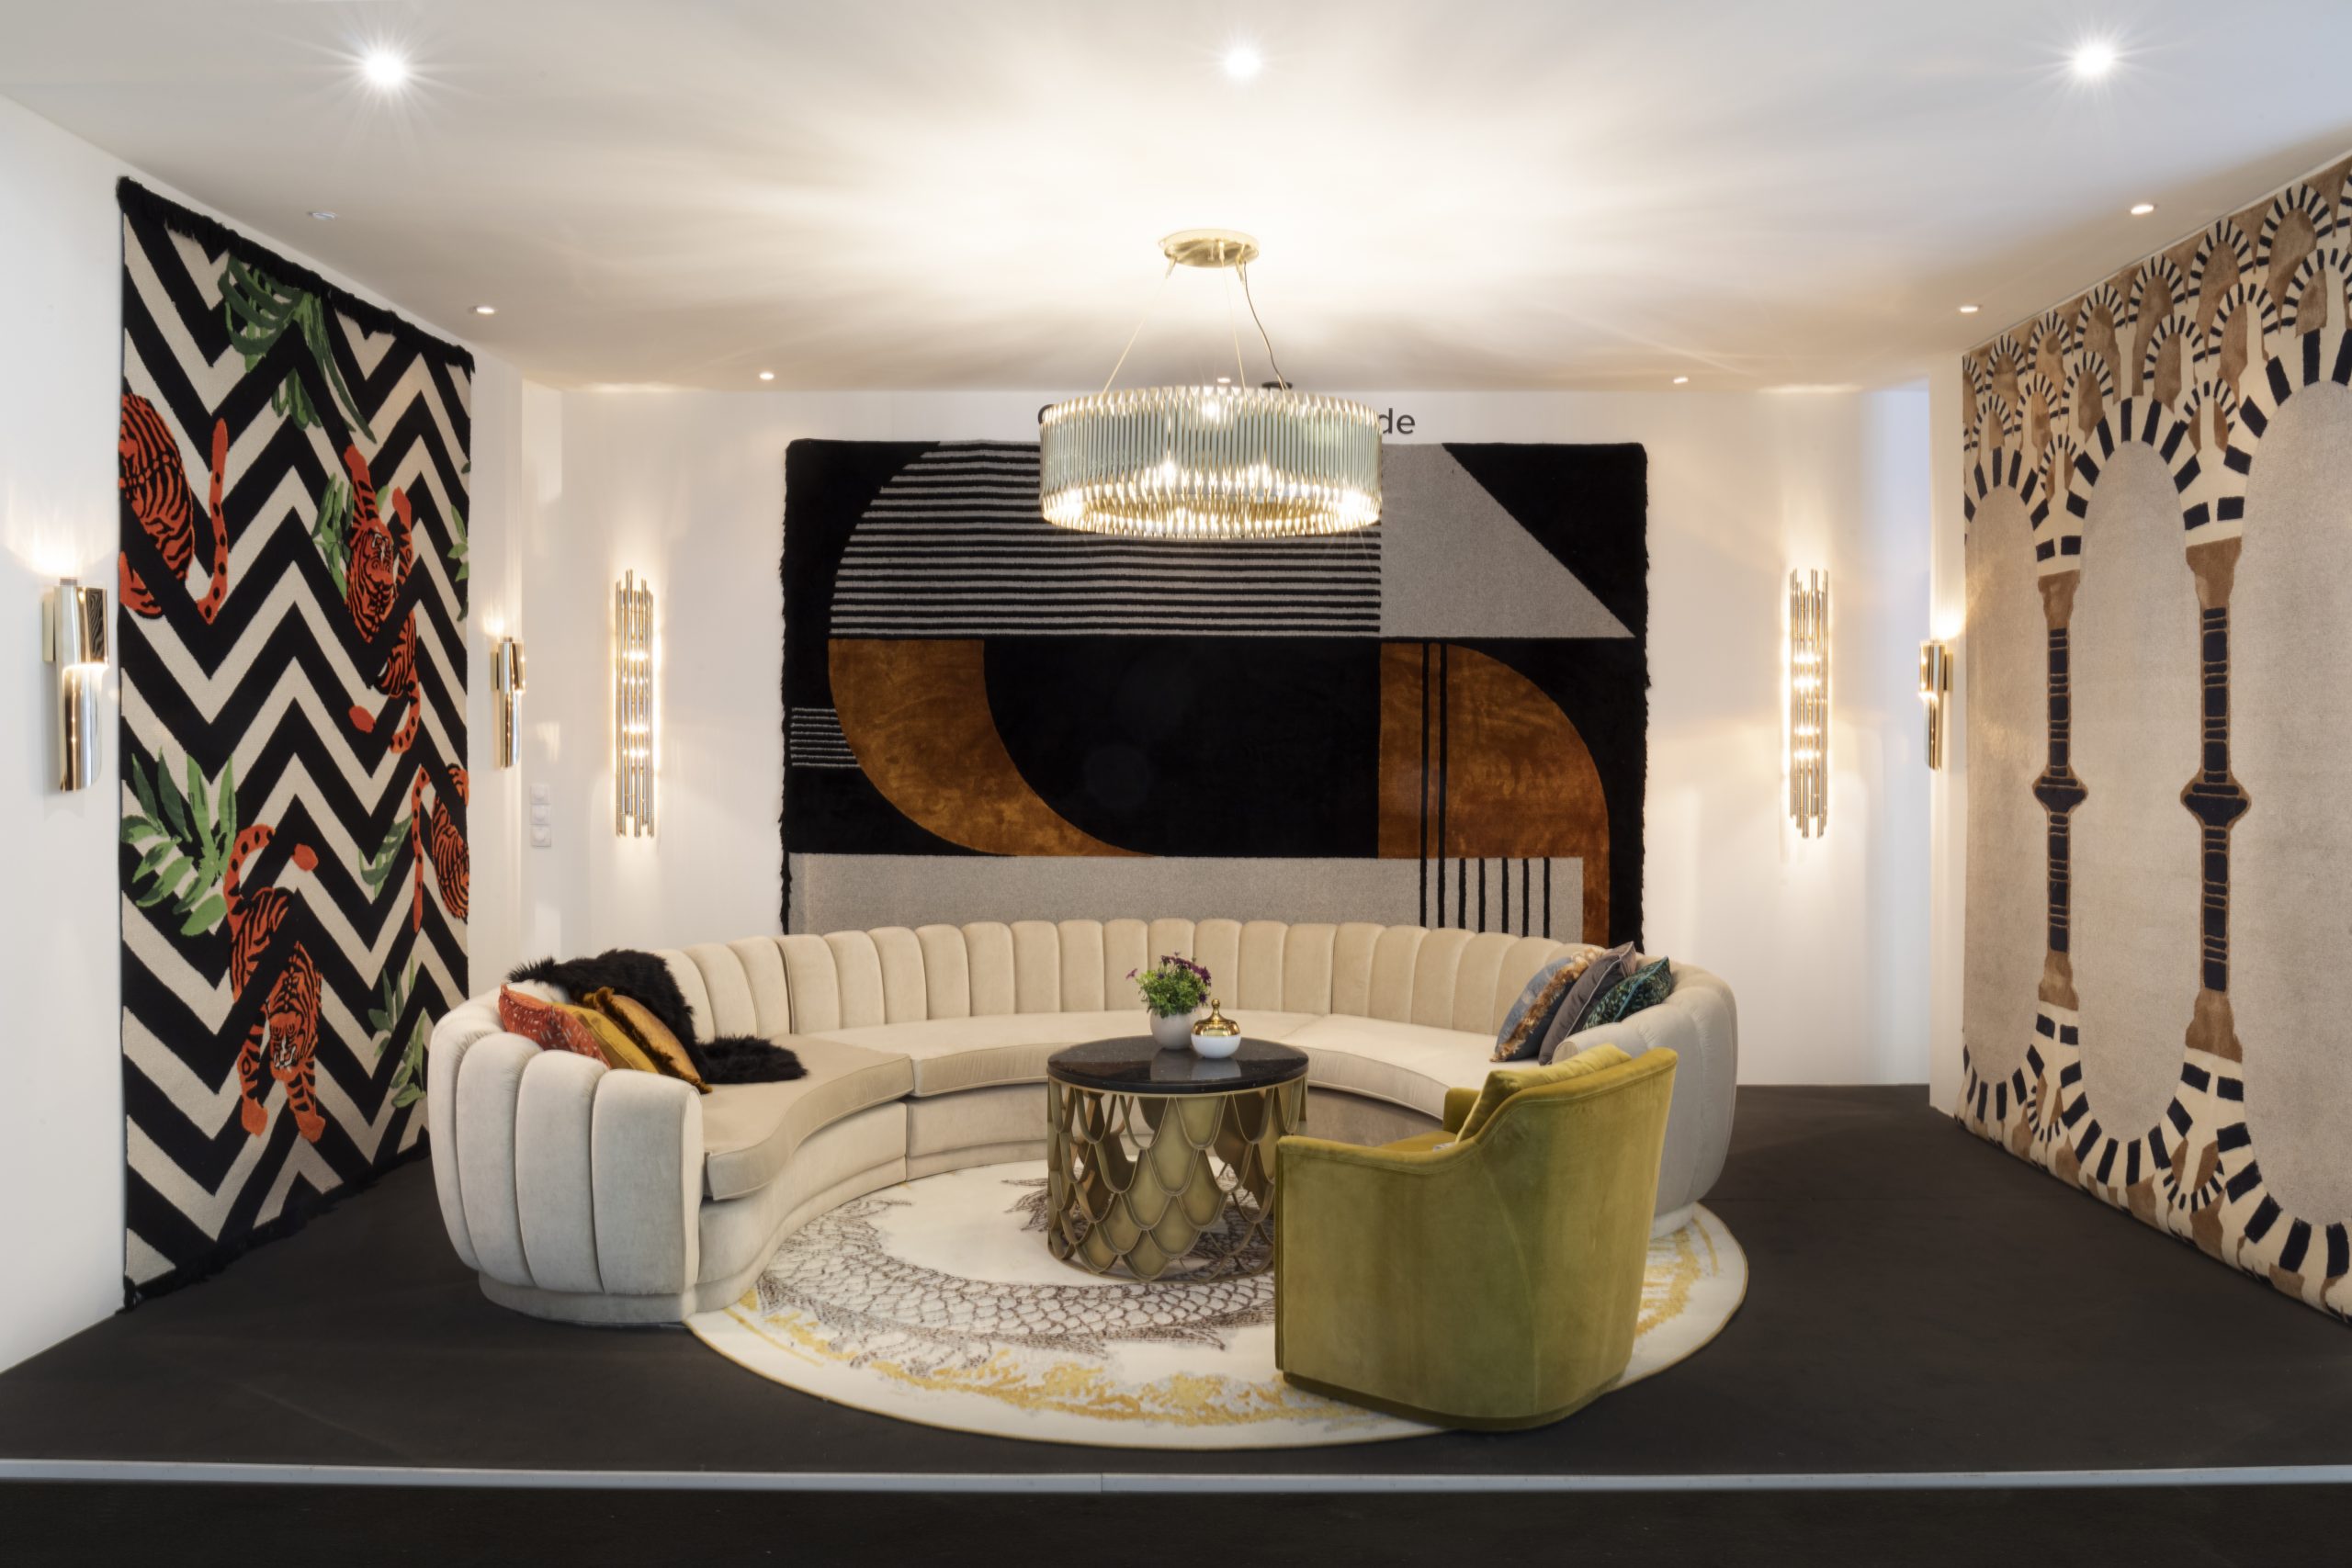 The Highlights of Milan Salone Del Mobile 2022 - modern contemporary living room design with round rug in silver and golden hues with wall rugs decorating the walls